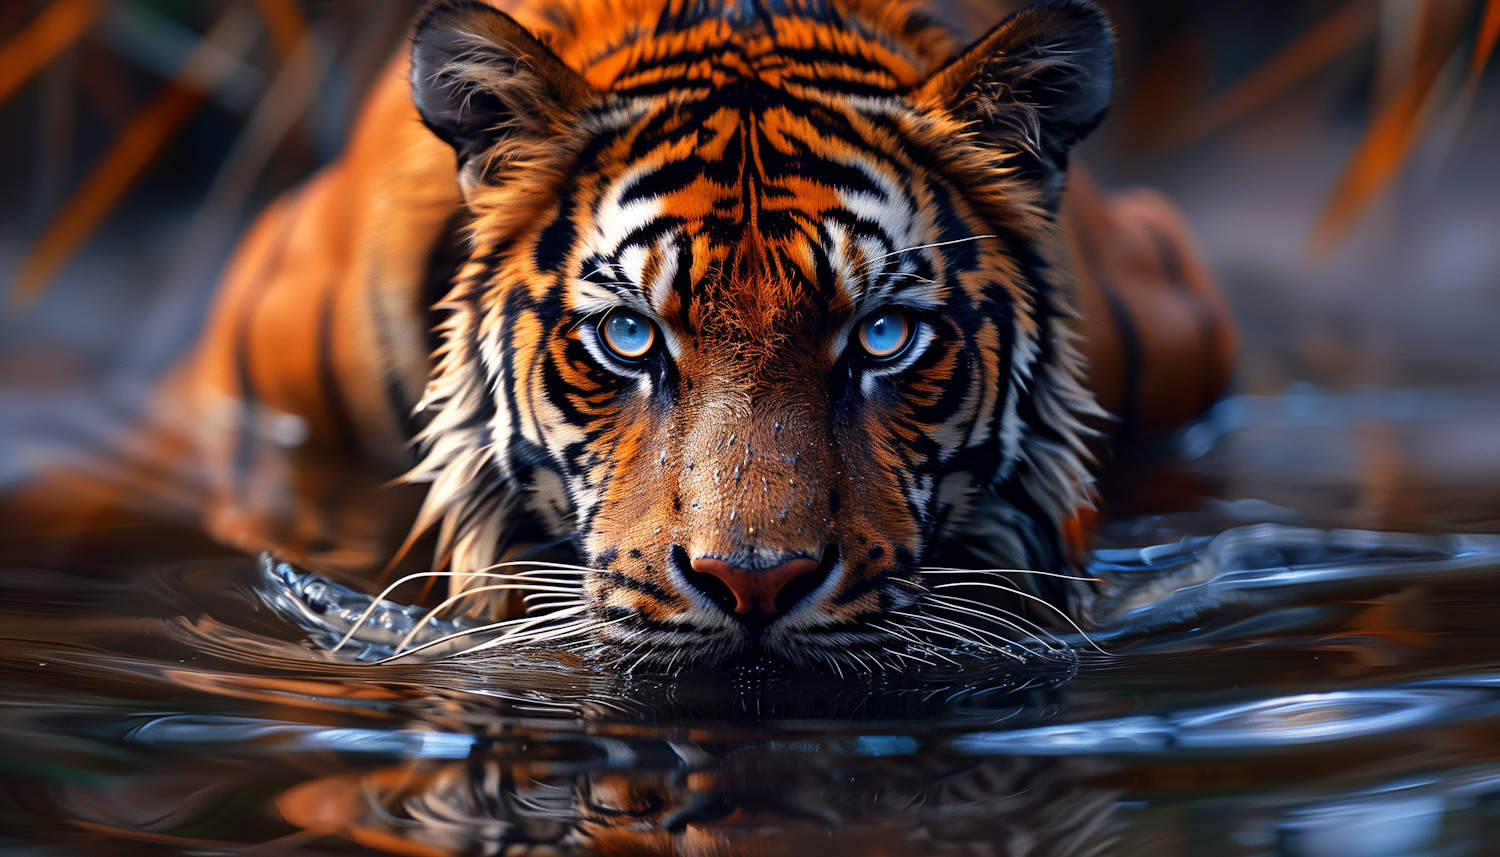 Piercing Blue Eyes of a Submerged Tiger